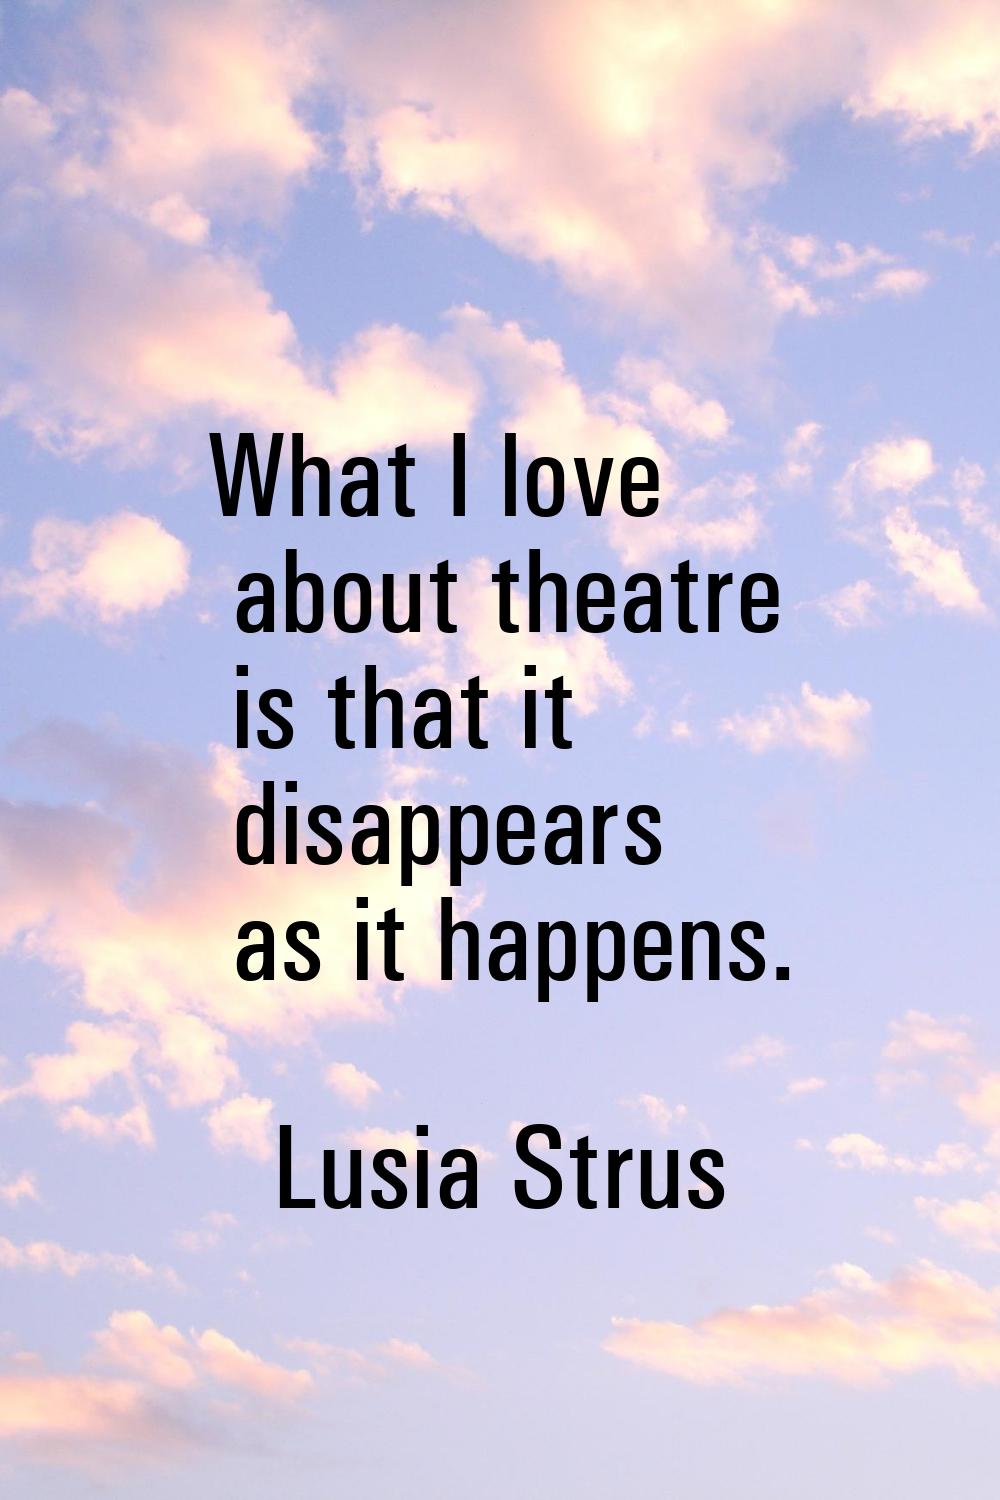 What I love about theatre is that it disappears as it happens.